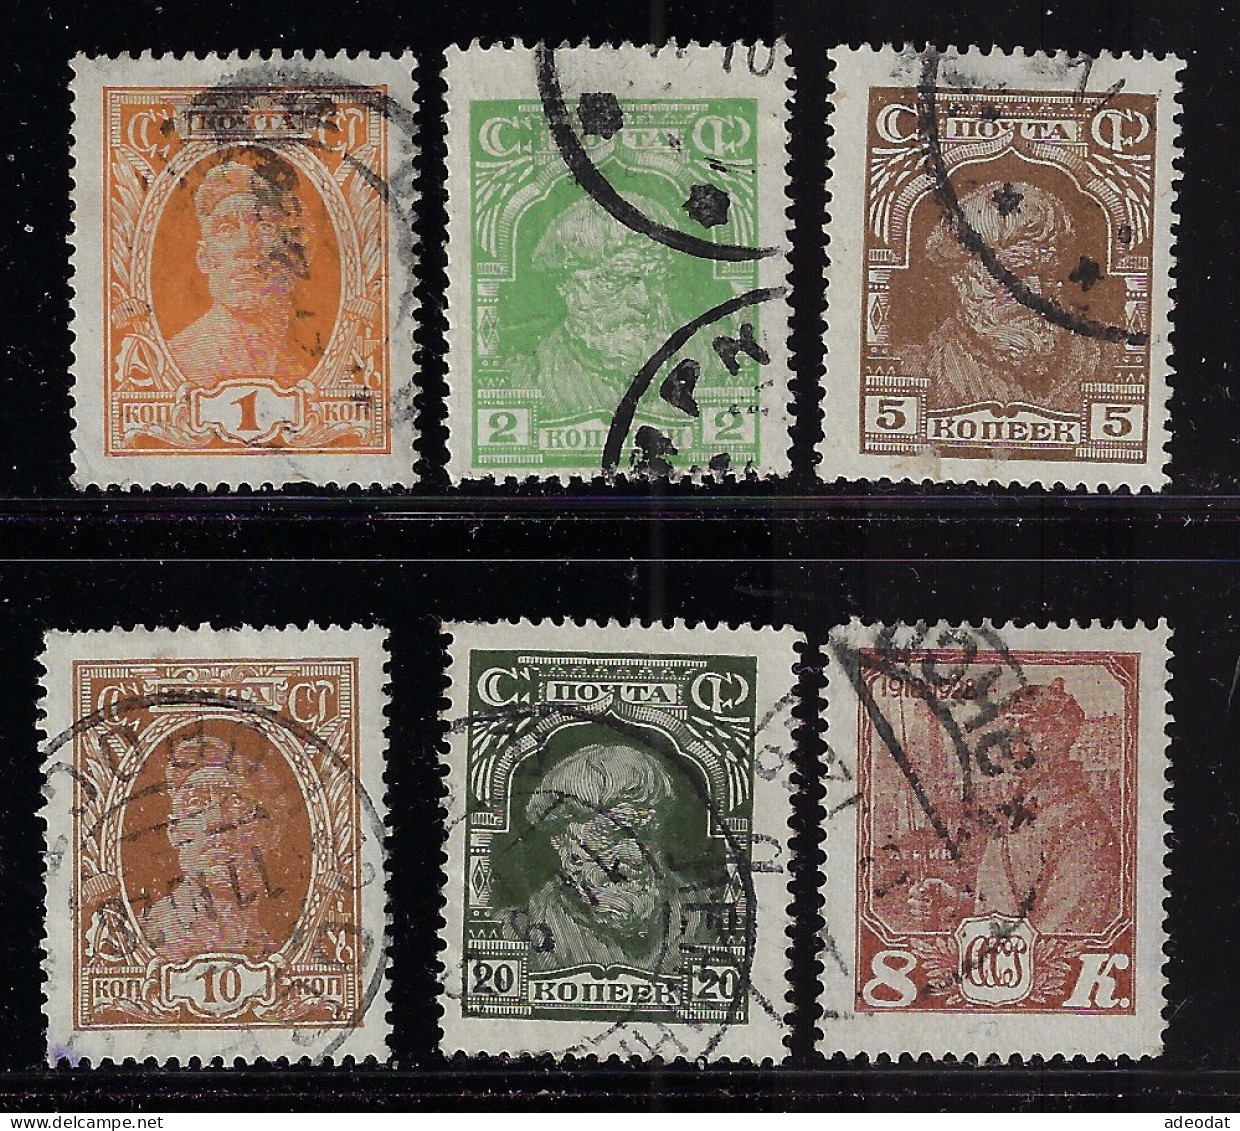 RUSSIA 1927 SCOTT #382,383,386,391,395,402 USED - Used Stamps